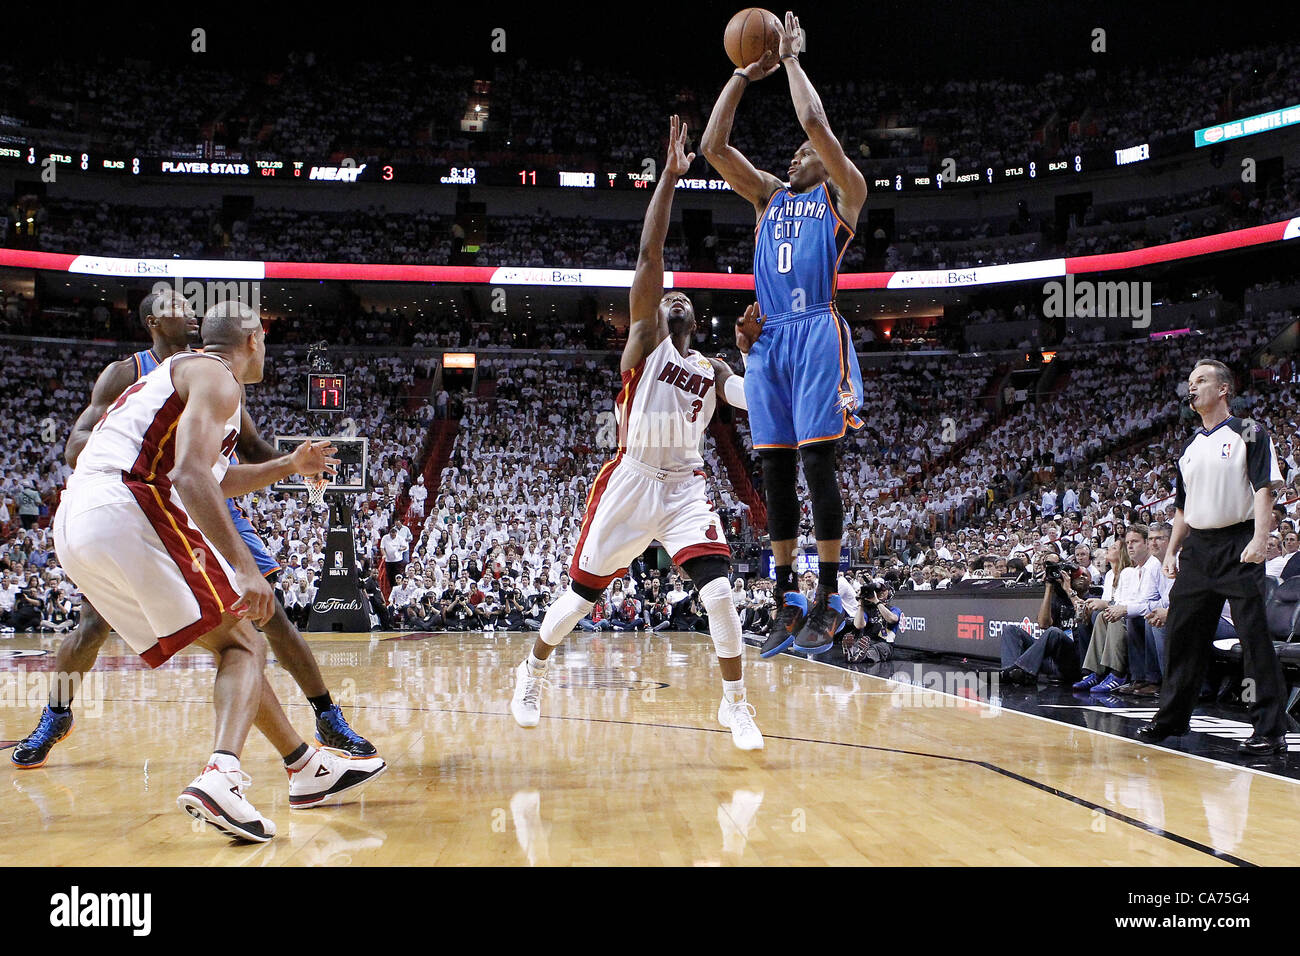 19.06.2012. Miami, Florida, USA.  Oklahoma City Thunder point guard Russell Westbrook (0) takes a jumpshot over Miami Heat shooting guard Dwyane Wade (3) during the first quarter of Game 4 of the 2012 NBA Finals, Thunder at Heat, at the American Airlines Arena, Miami, Florida, USA. Stock Photo